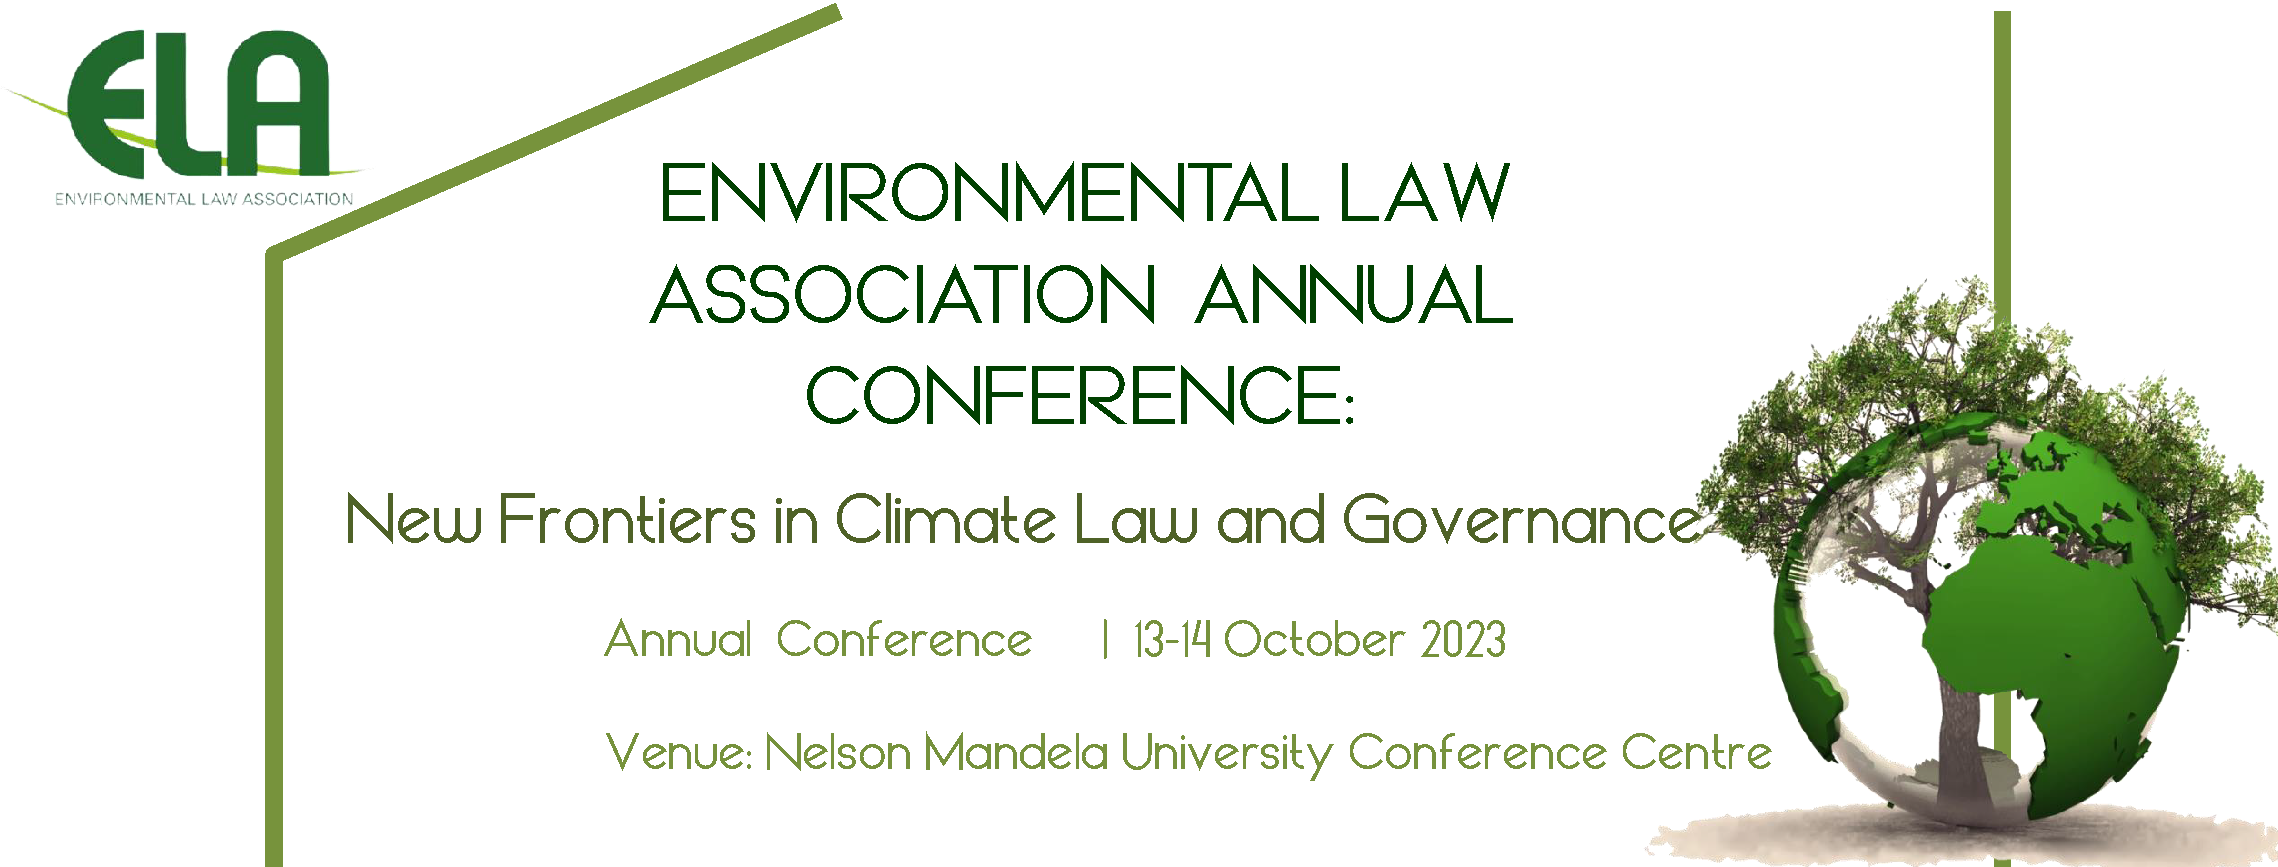 Annual Conference 2023 - New Frontiers in Climate Law and Governance